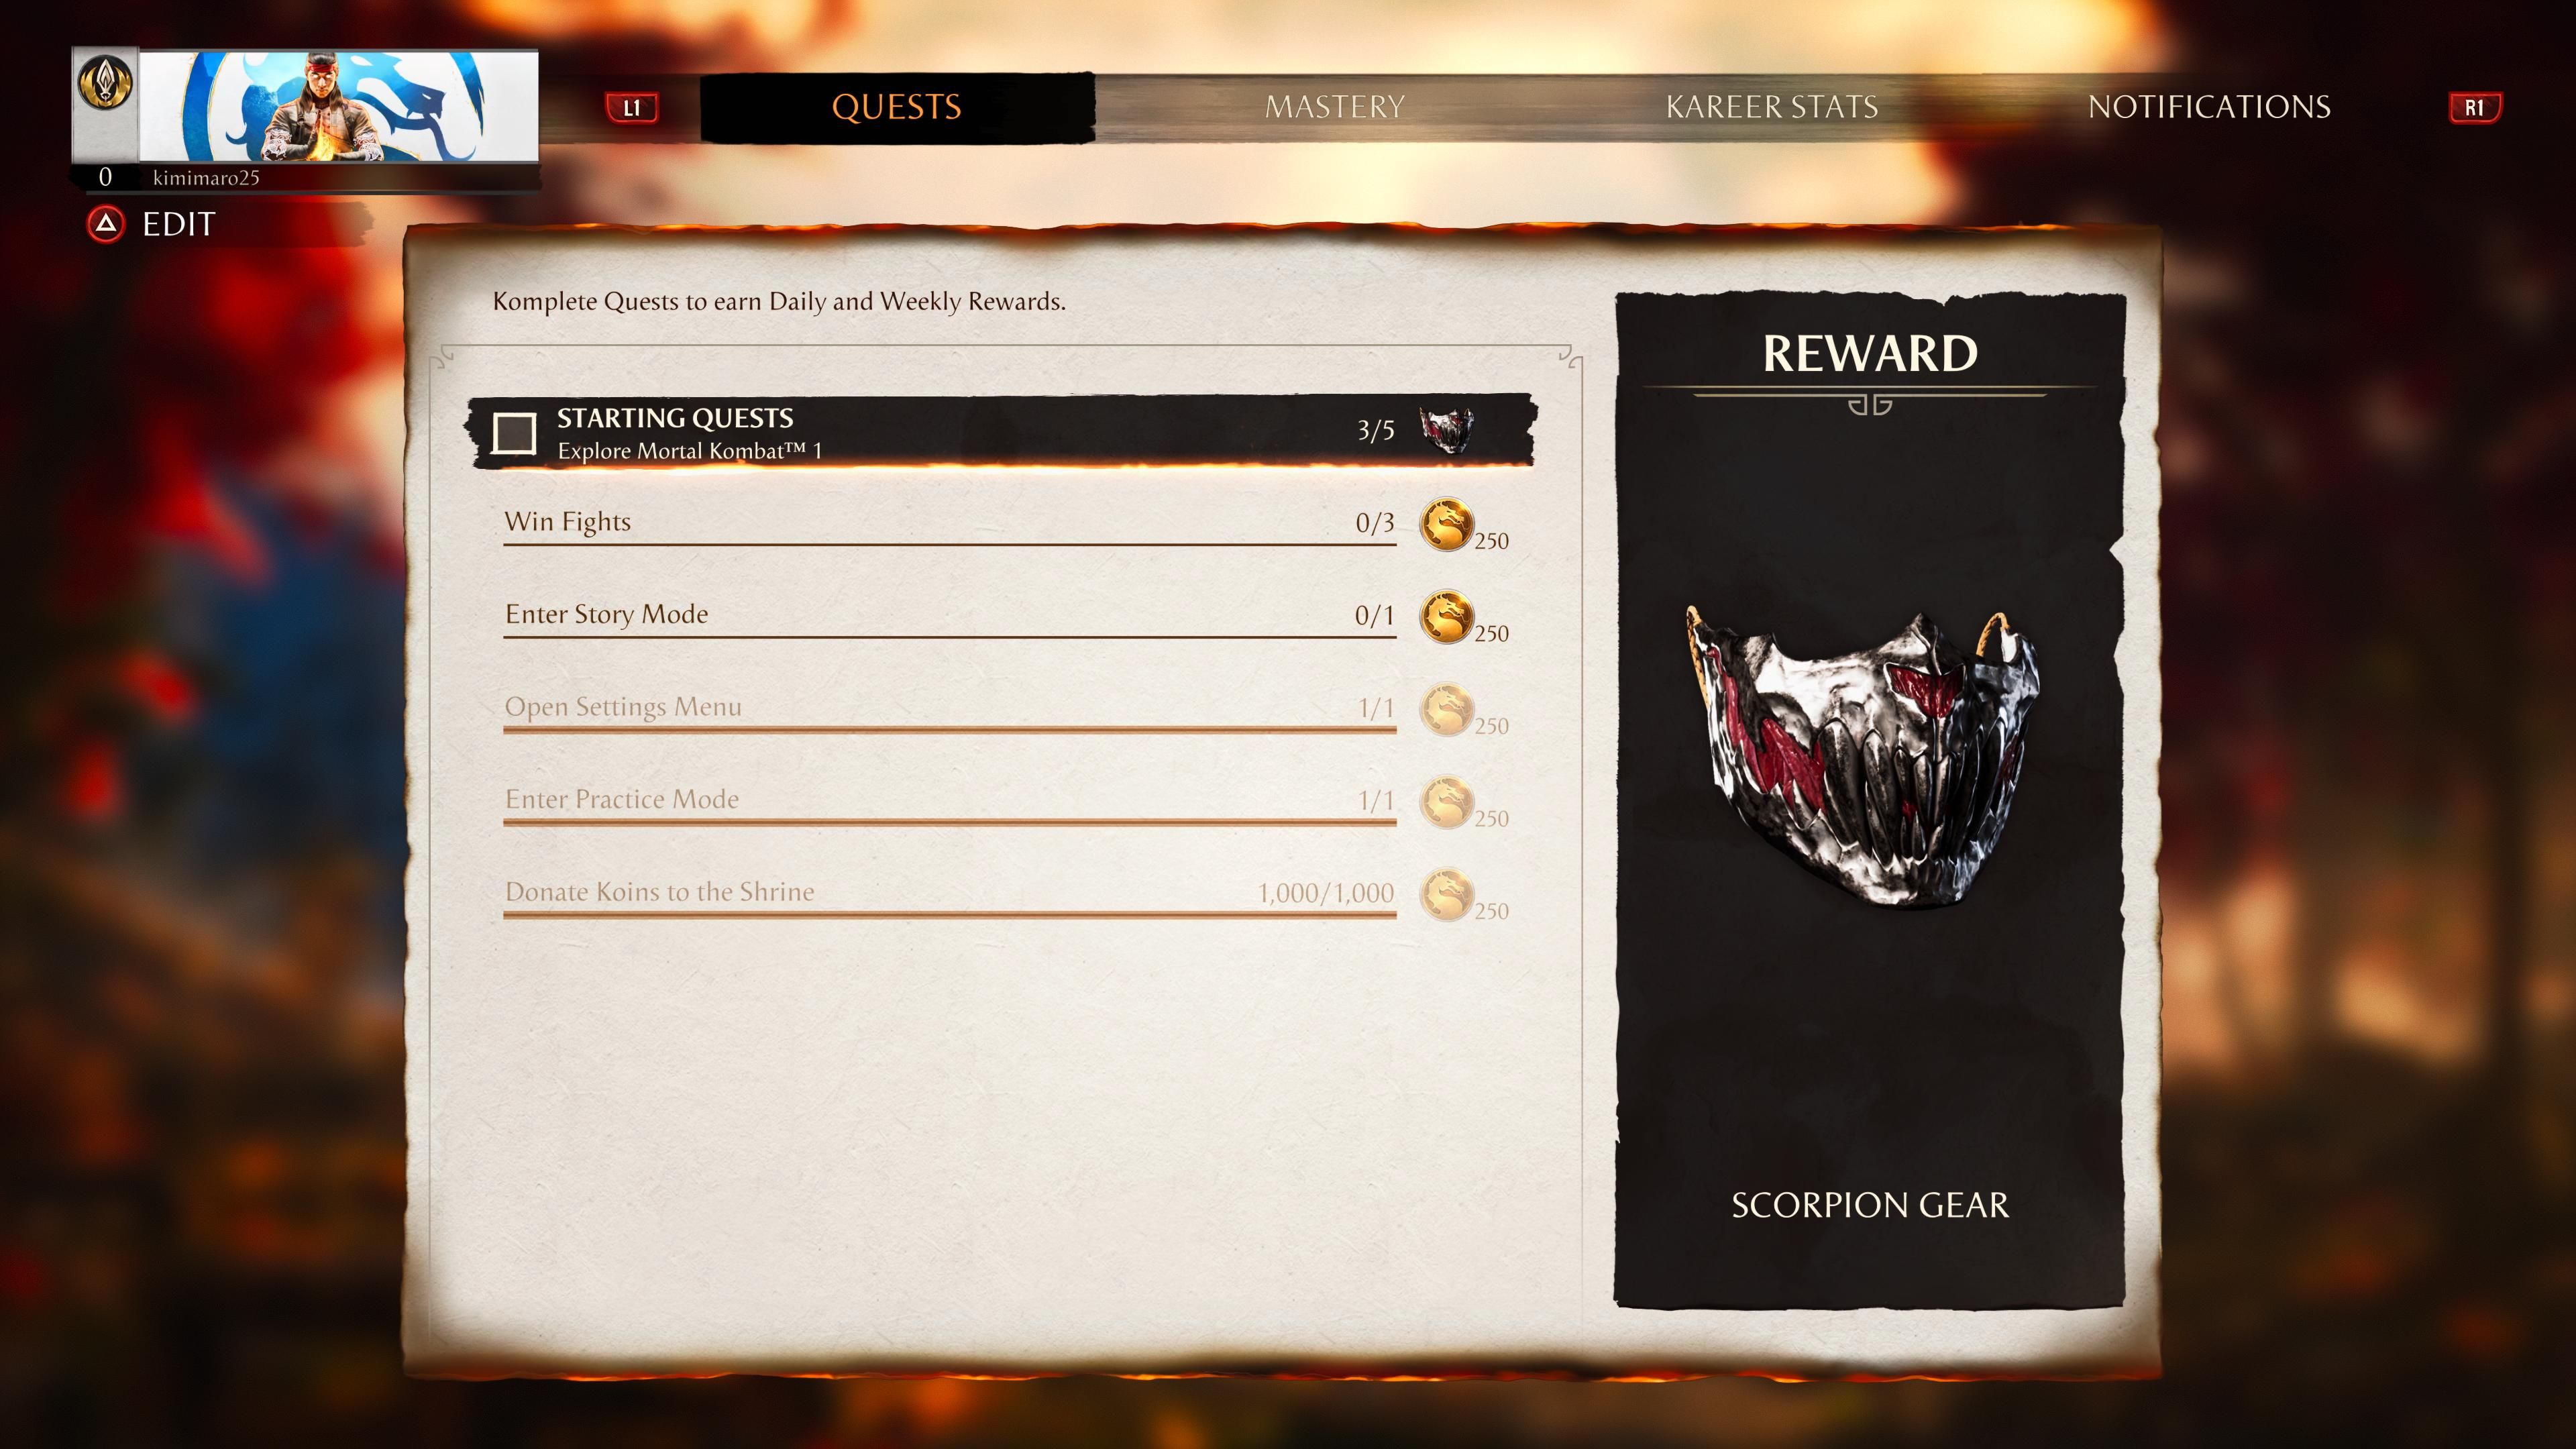 A screenshot showing the five starting quests you get in MK 1, plus the reward.